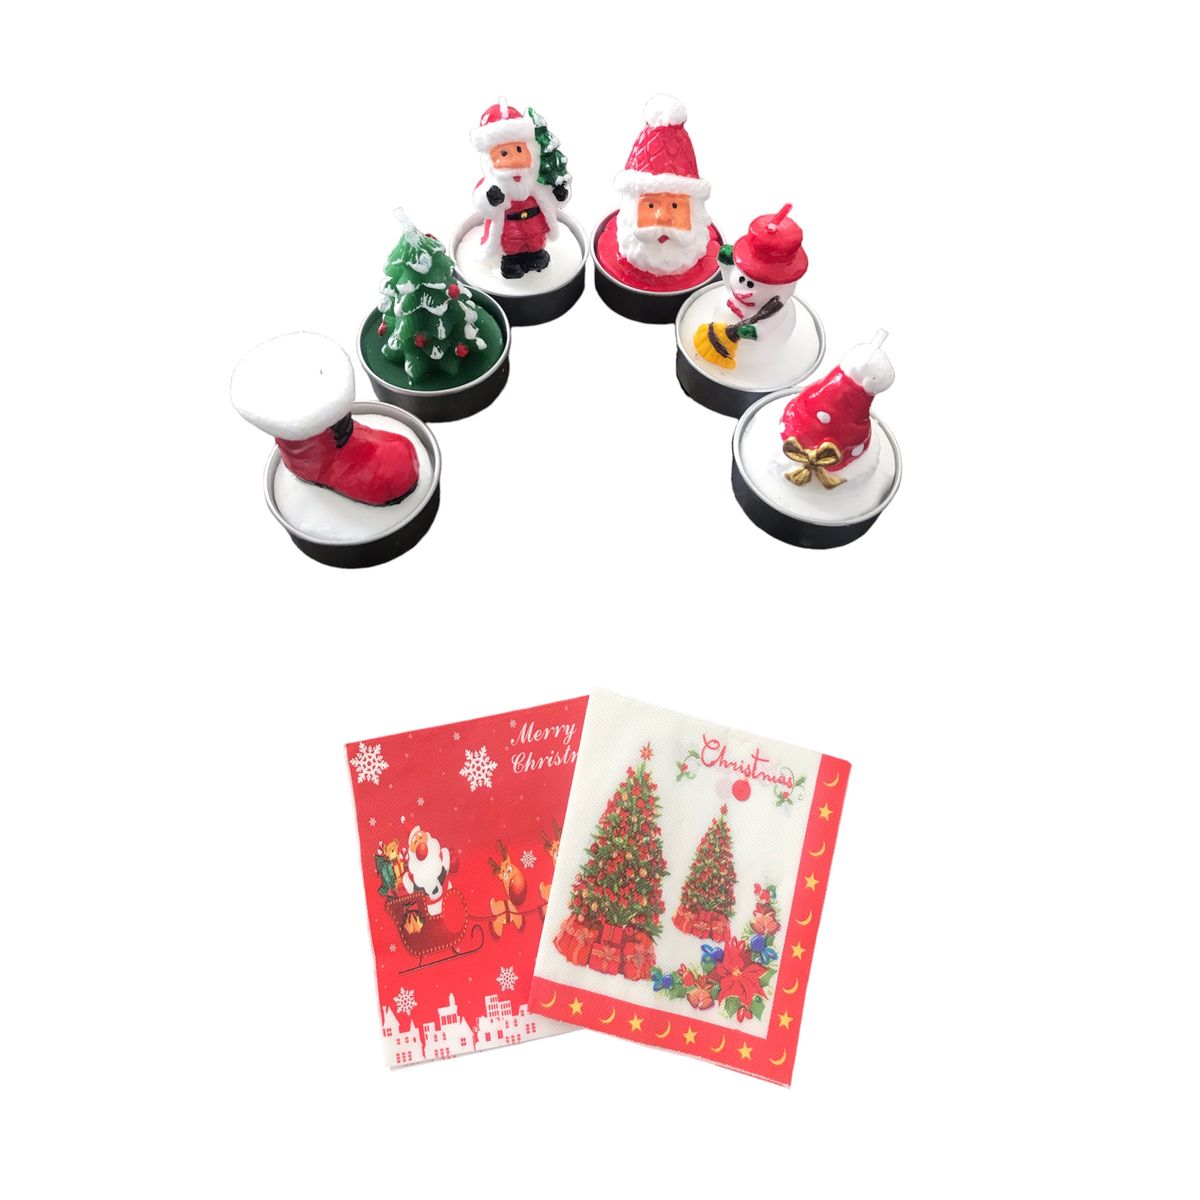 Christmas Mini Candles x 6 & Serviettes x 2 Packs of 10 Combo